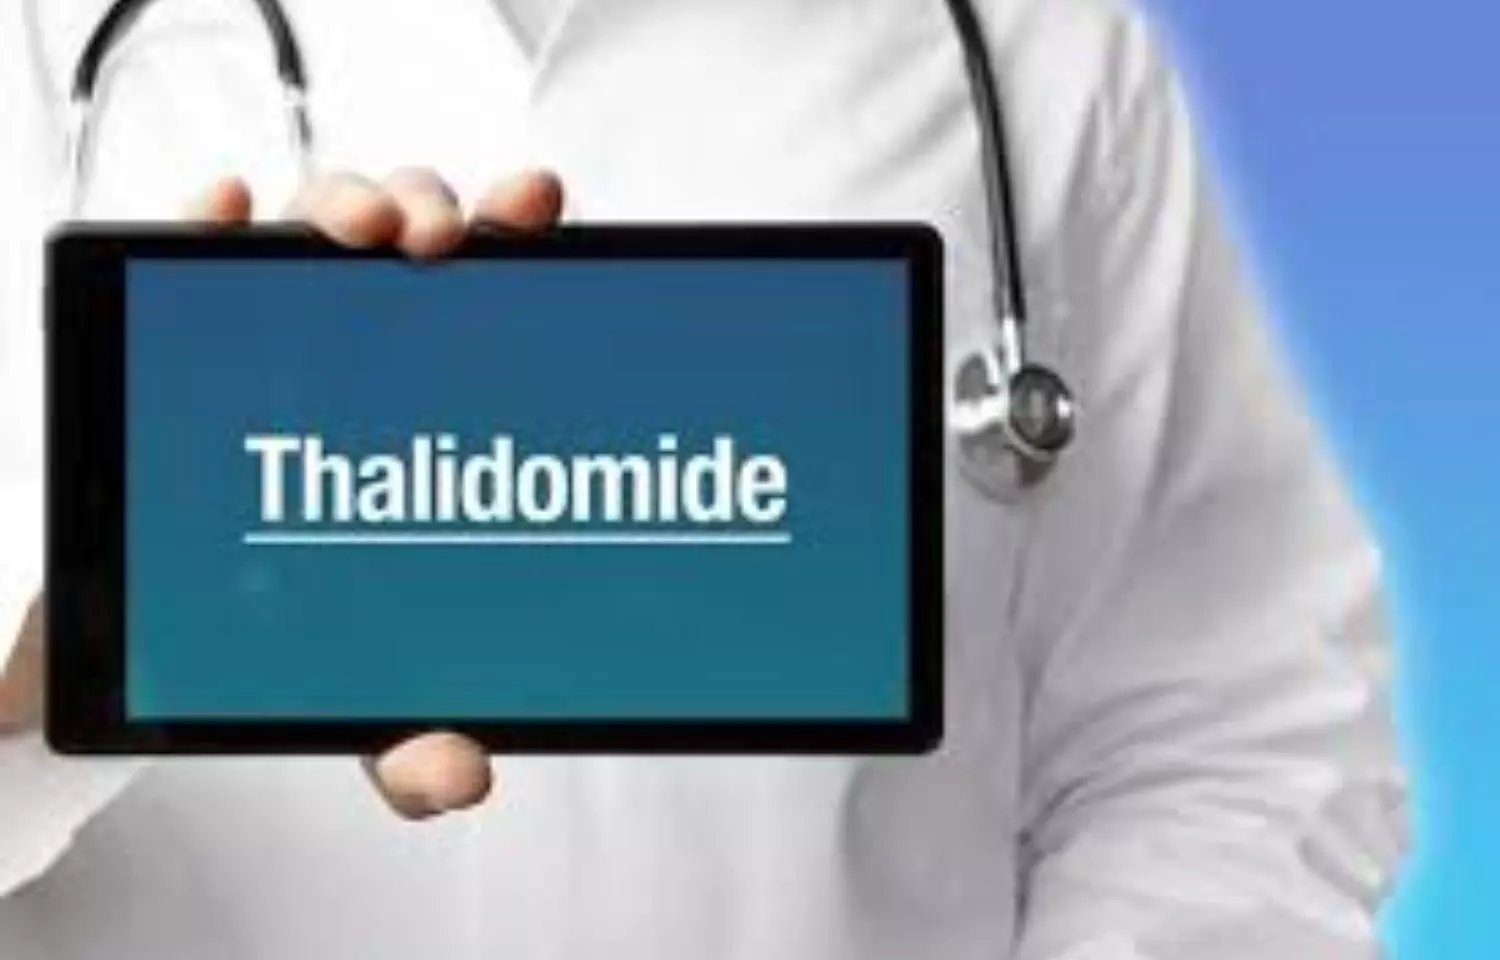 Thalidomide an effective treatment for abnormal blood vessel formations